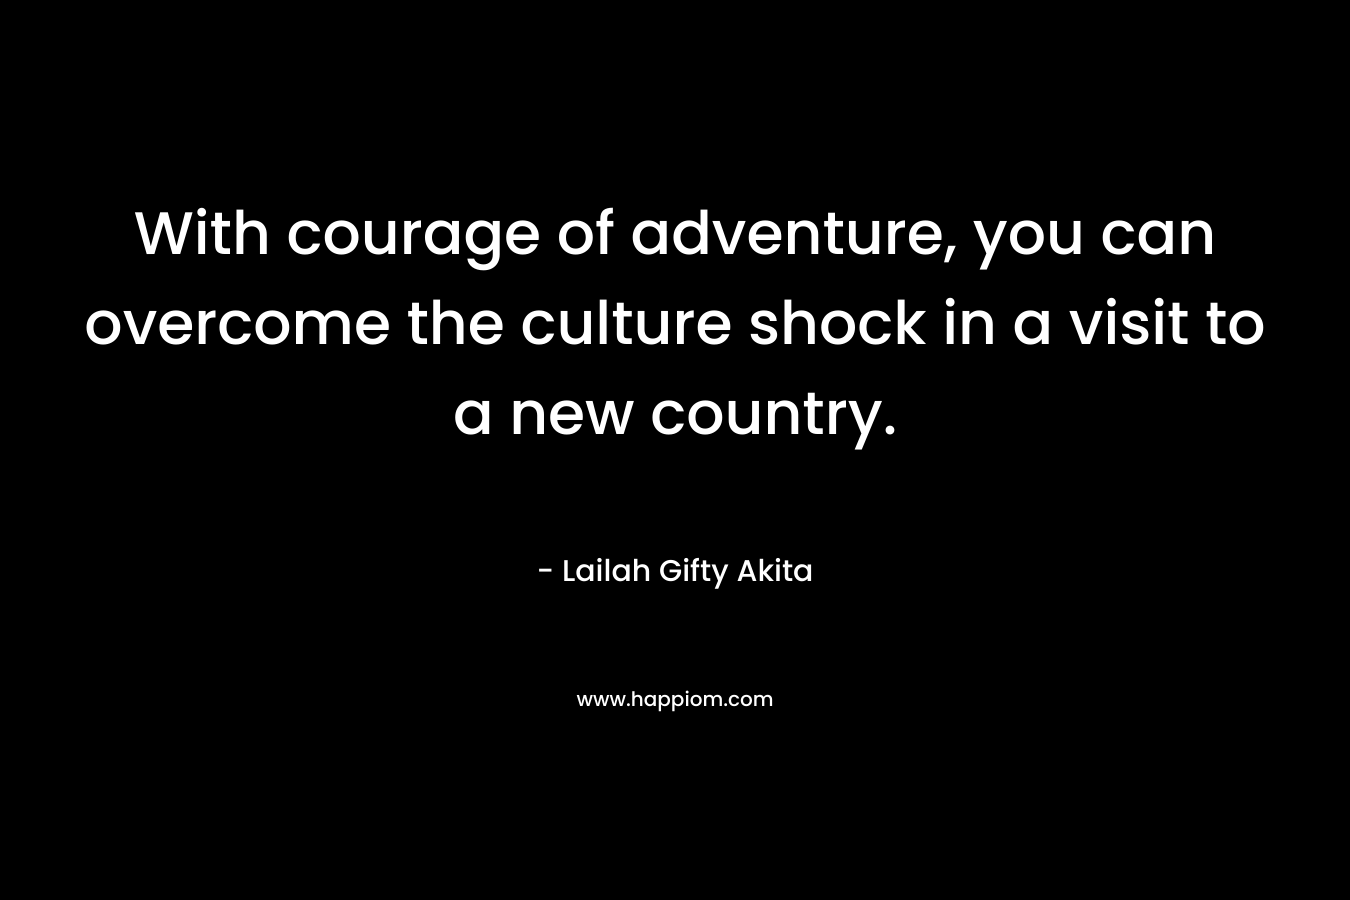 With courage of adventure, you can overcome the culture shock in a visit to a new country.